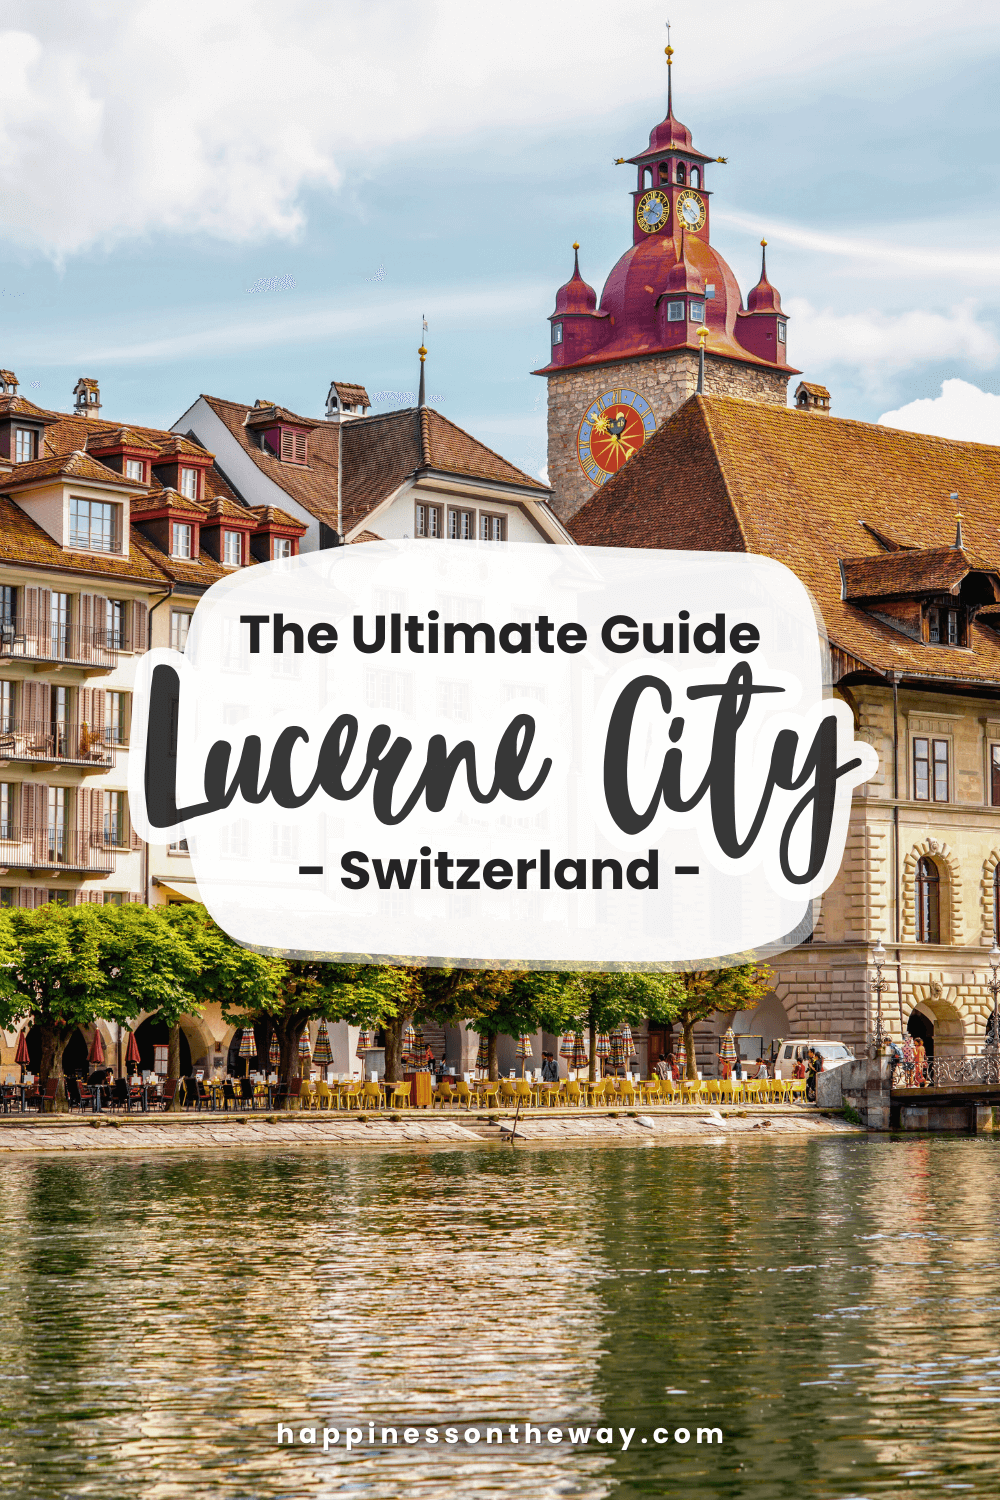 The Ultimate Guide Lucerne City Switzerland